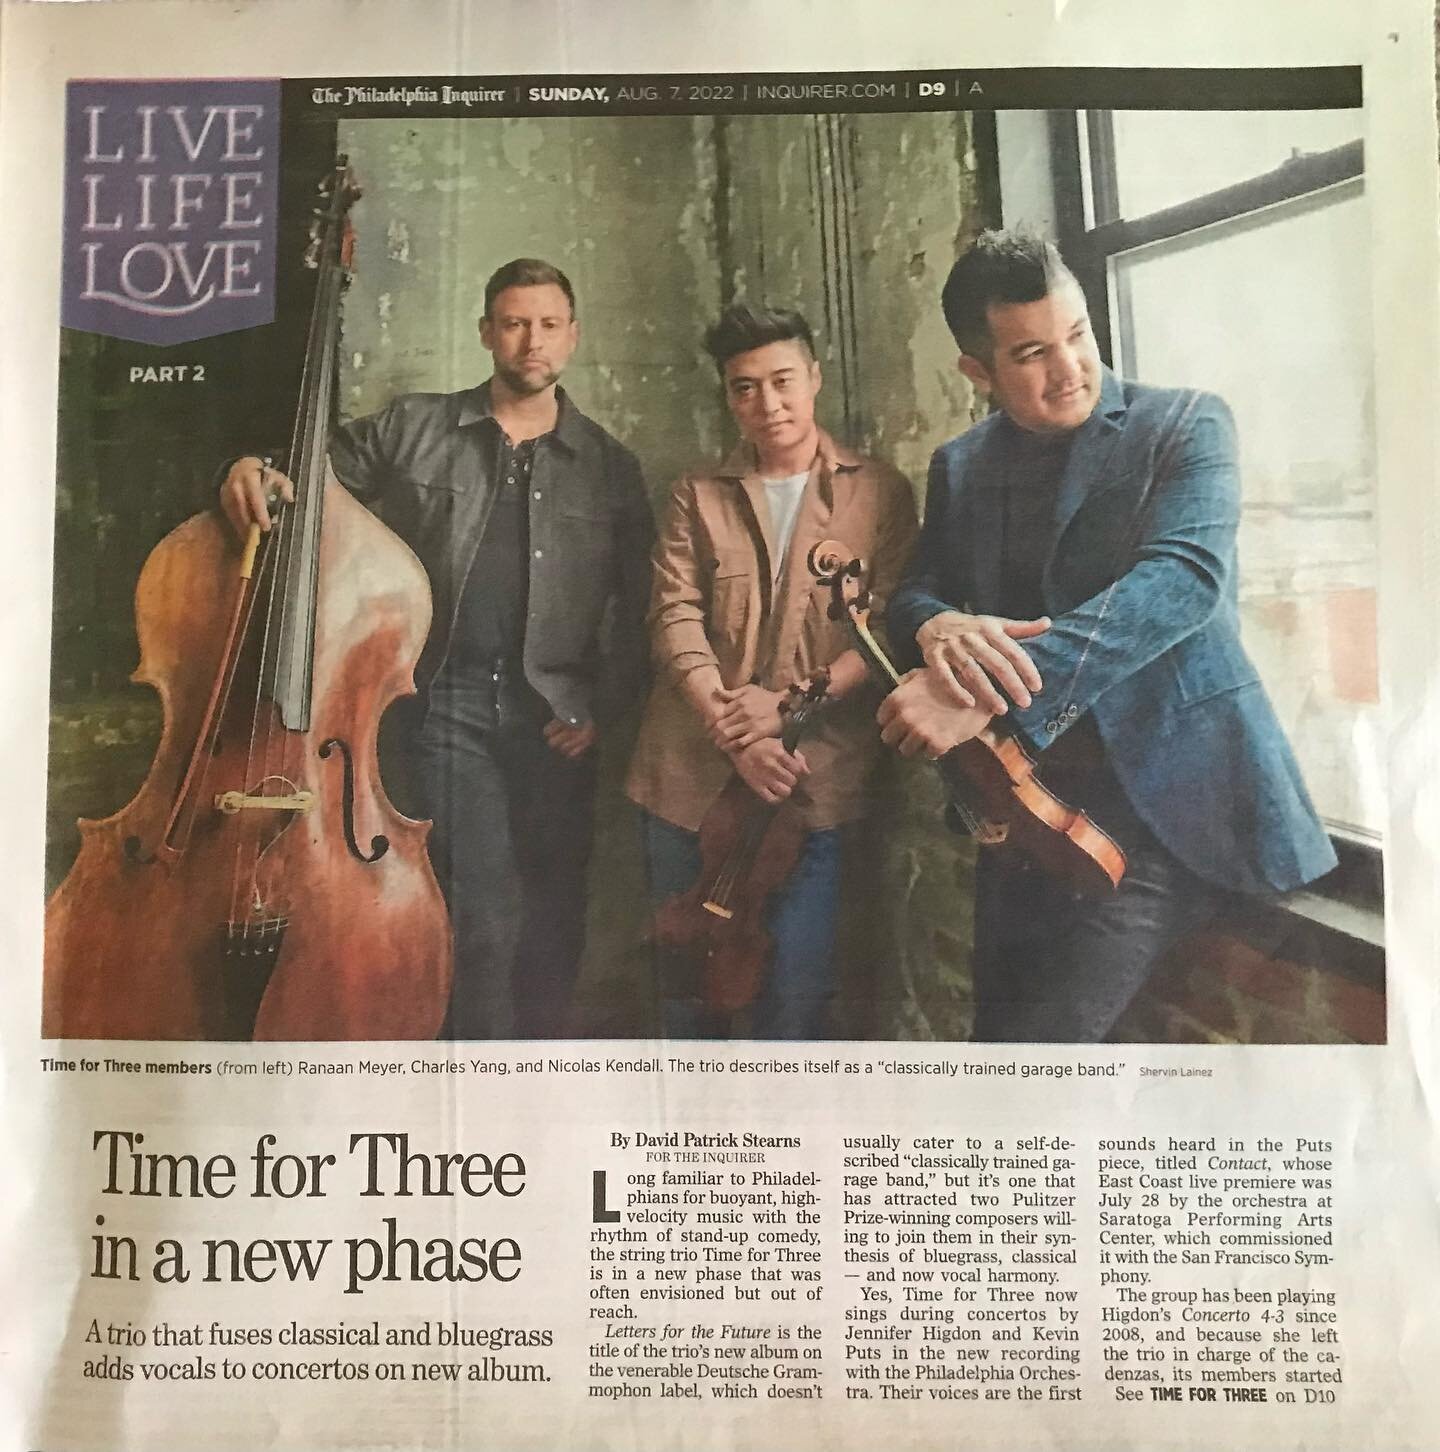 The Inquirer

Thank you to David Patrick Stearns and The Philadelphia Inquirer for our featured story. You always bring so much poetry to arts and culture. We appreciate you :)